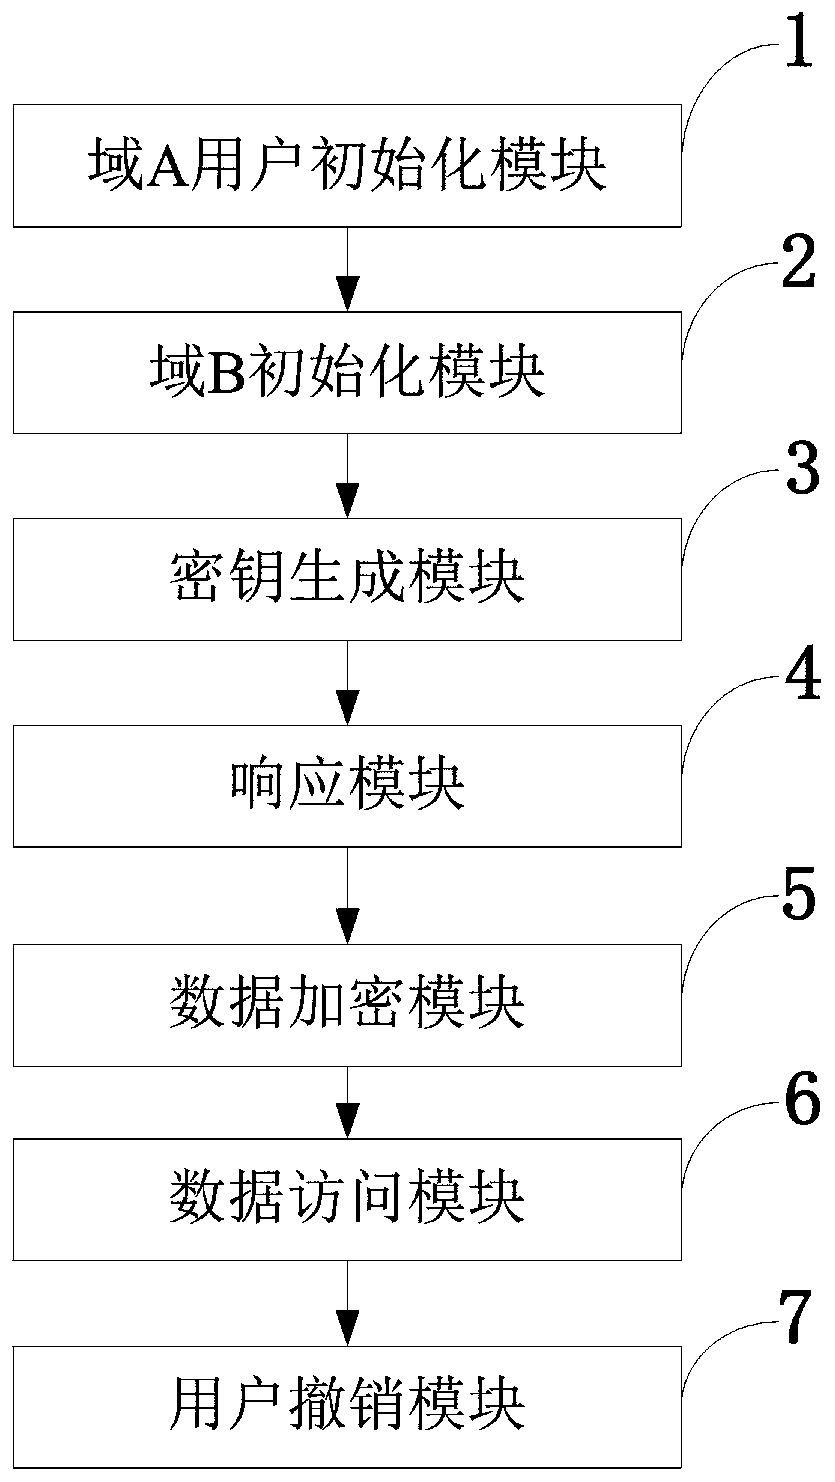 Access control system and method supporting cross-domain data sharing and wireless communication system